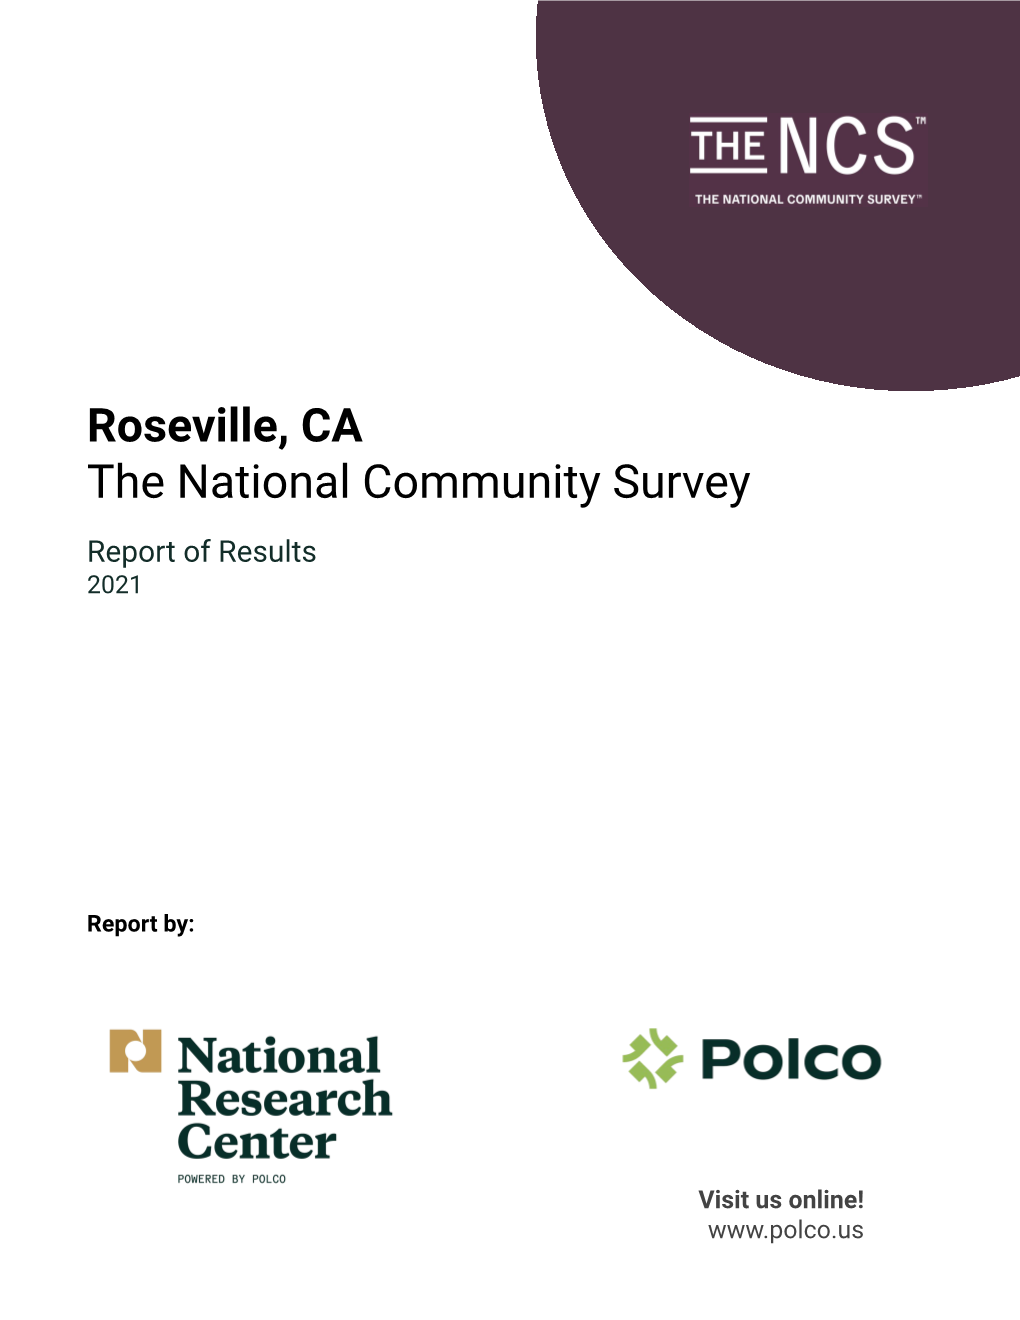 Roseville, CA the National Community Survey Report of Results 2021